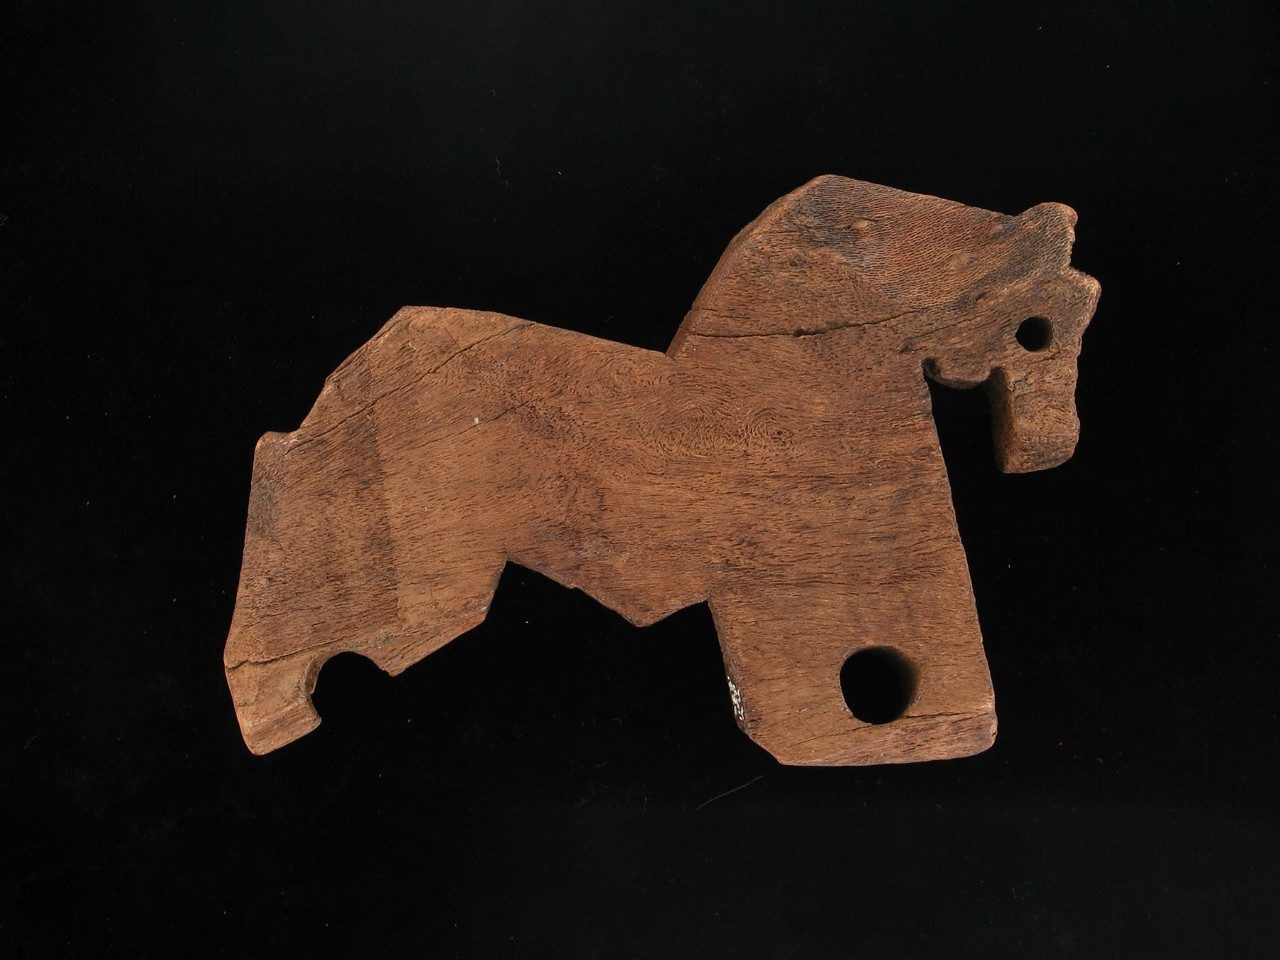 A 2-D horse shape carved from wood. There is a hole for the horse’s eye, as well as two large holes on its legs where wheels might have attached.